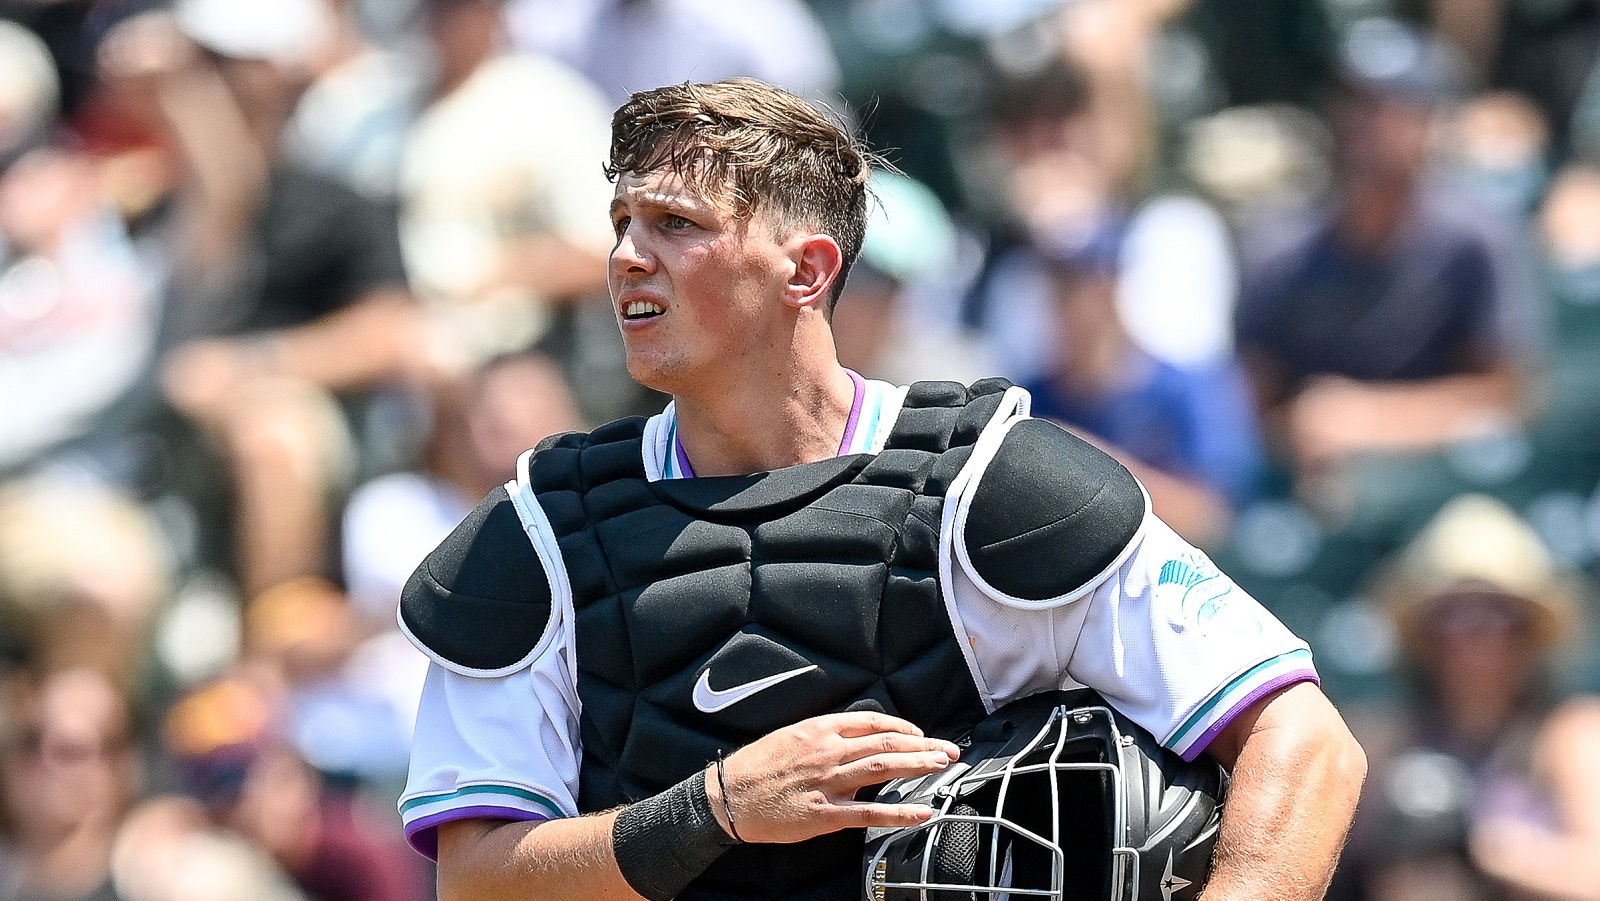 Adley Rutschman looks on during a minor-league all-star game at Coors Field on July 11, 2021, in Denver, Colorado. | .Dustin Bradford/Getty Images